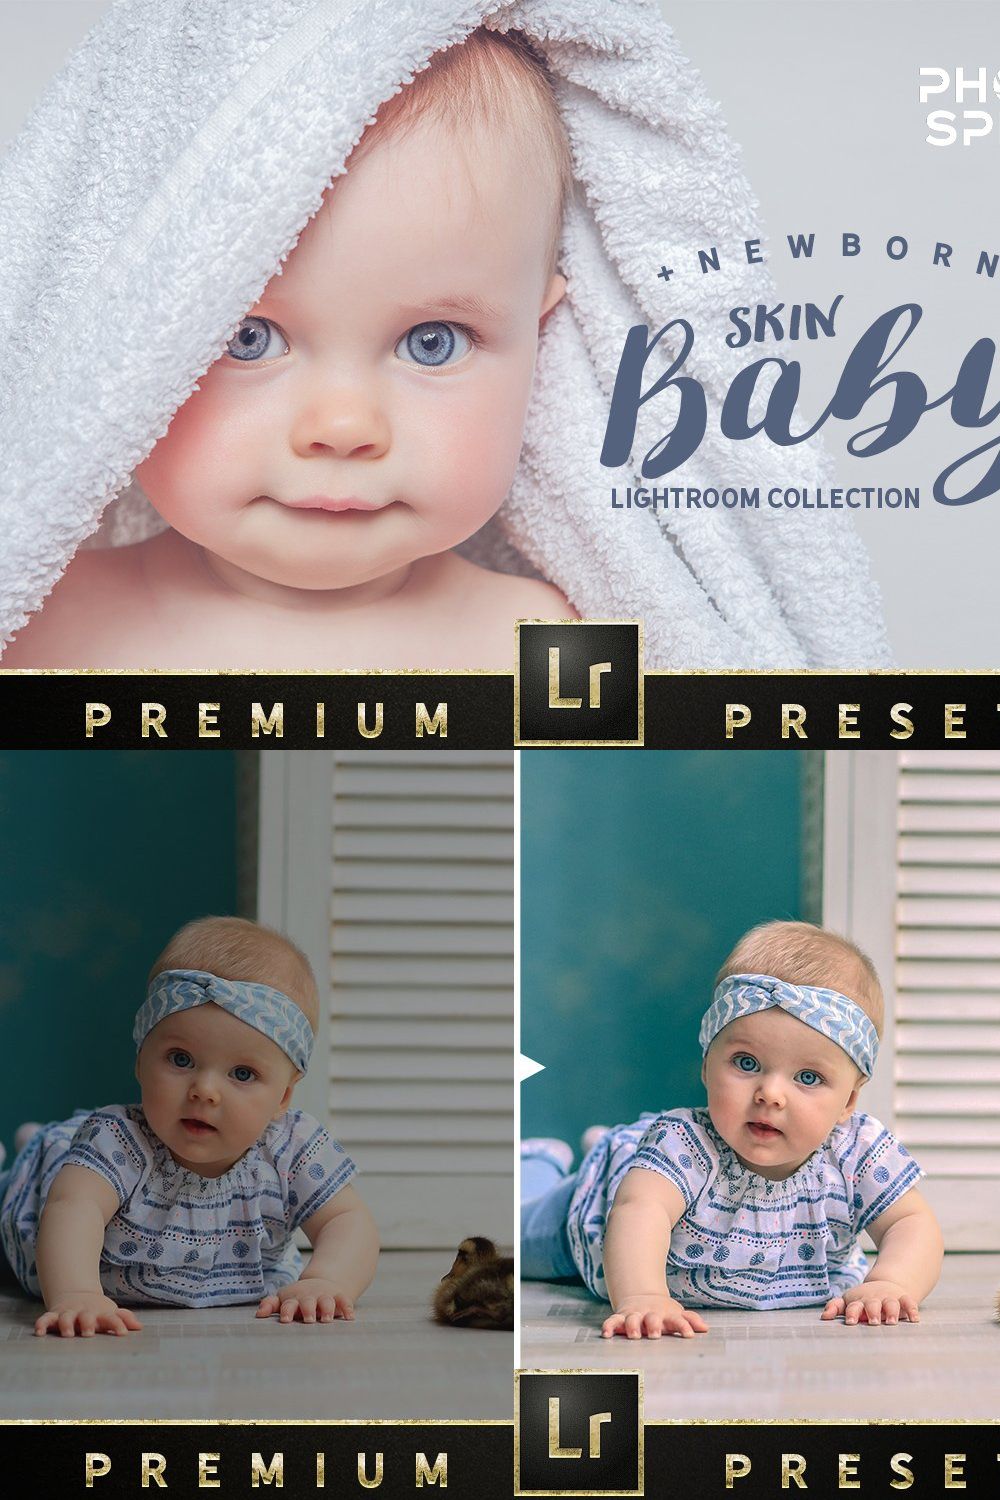 Newborn Baby Lightroom Collection pinterest preview image.